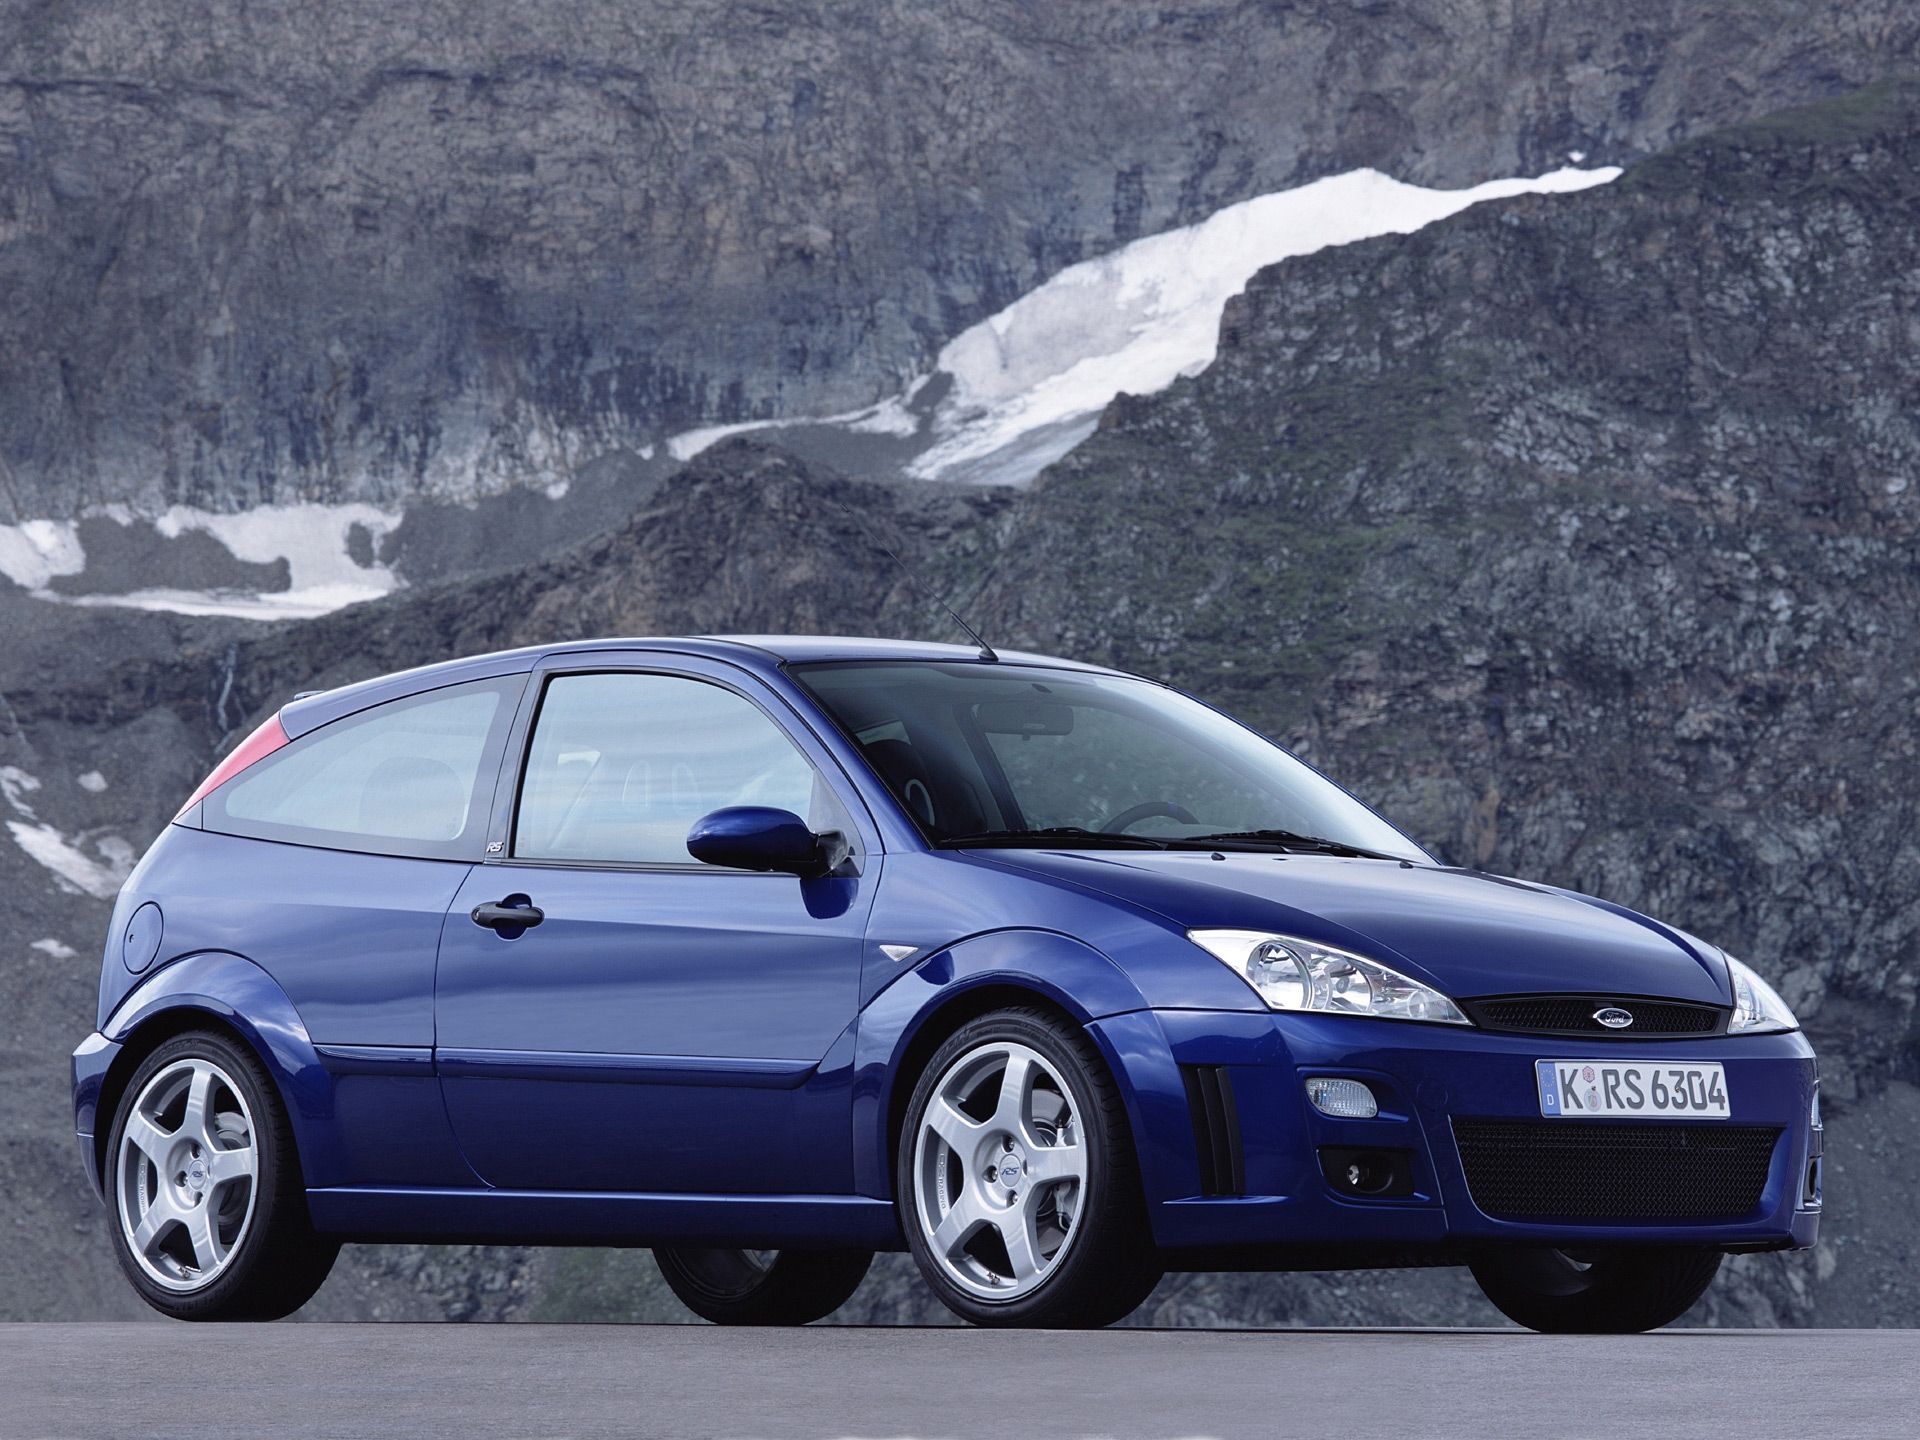 2002-Ford-Focus-RS-003-1440